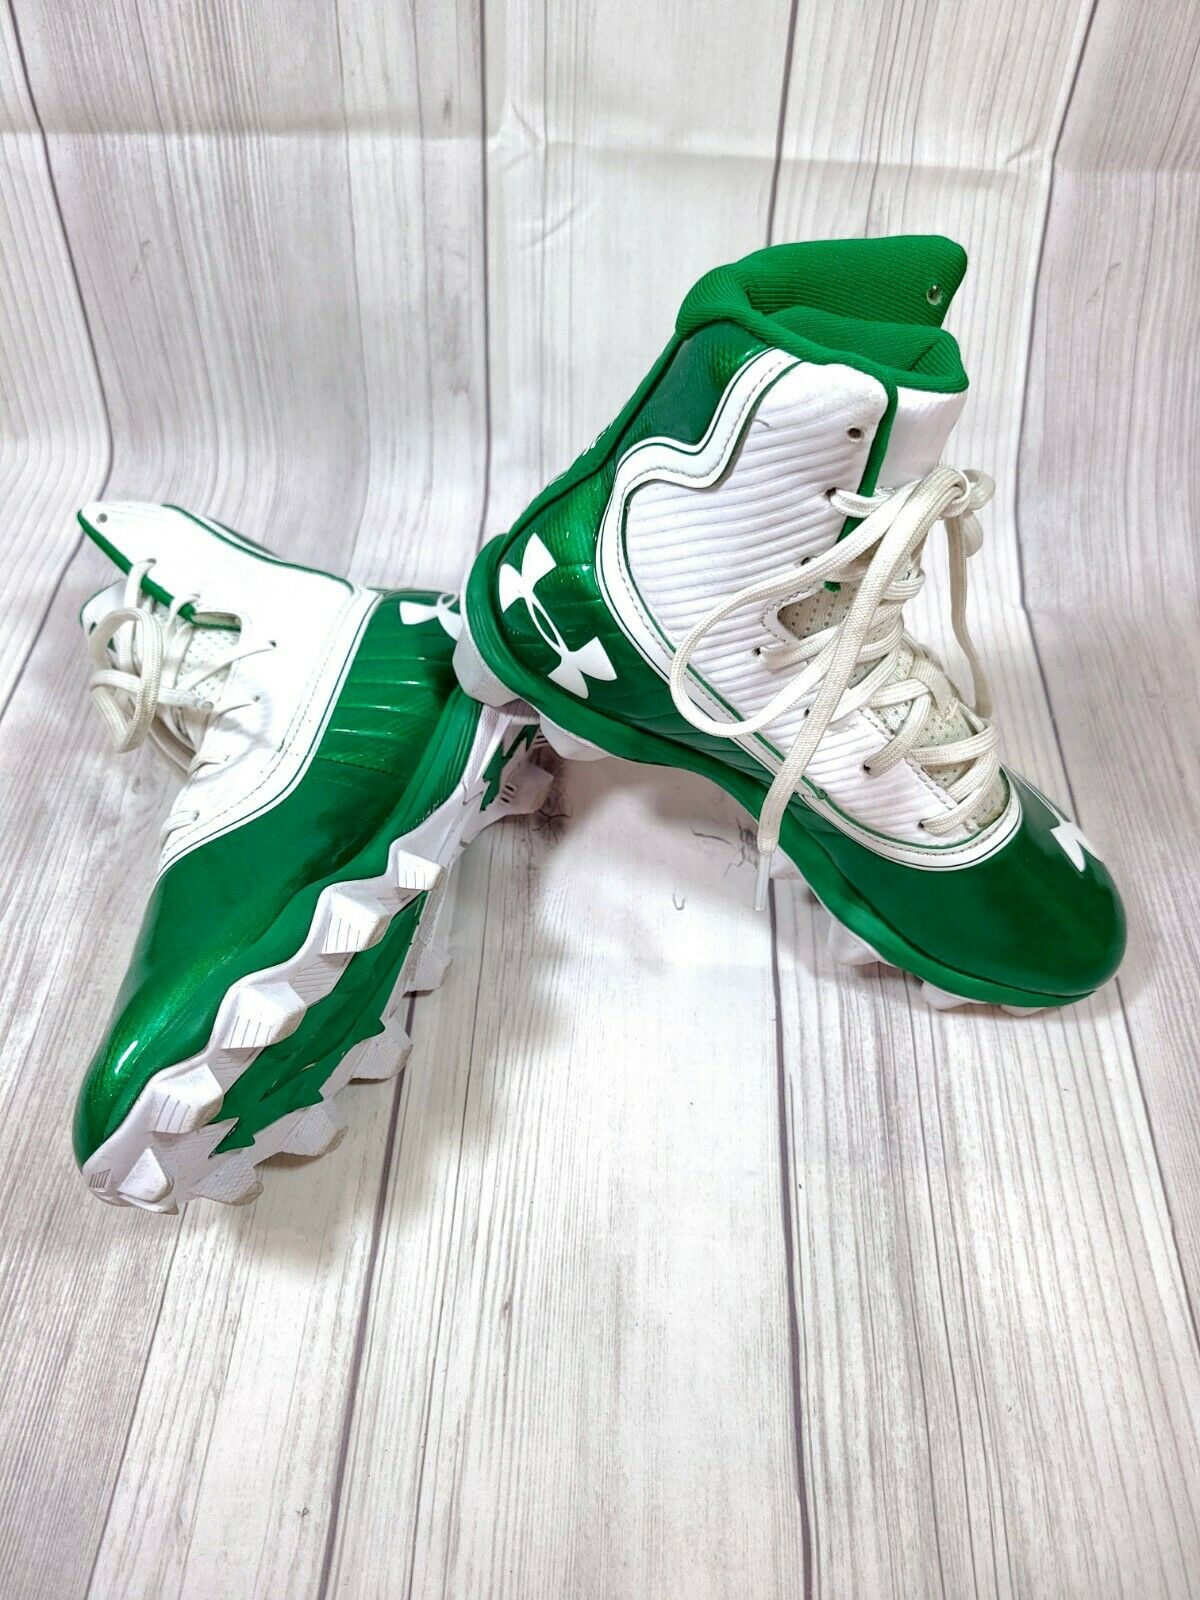 Under Armour Highlight Football Cleats Green & White Youth Size 4